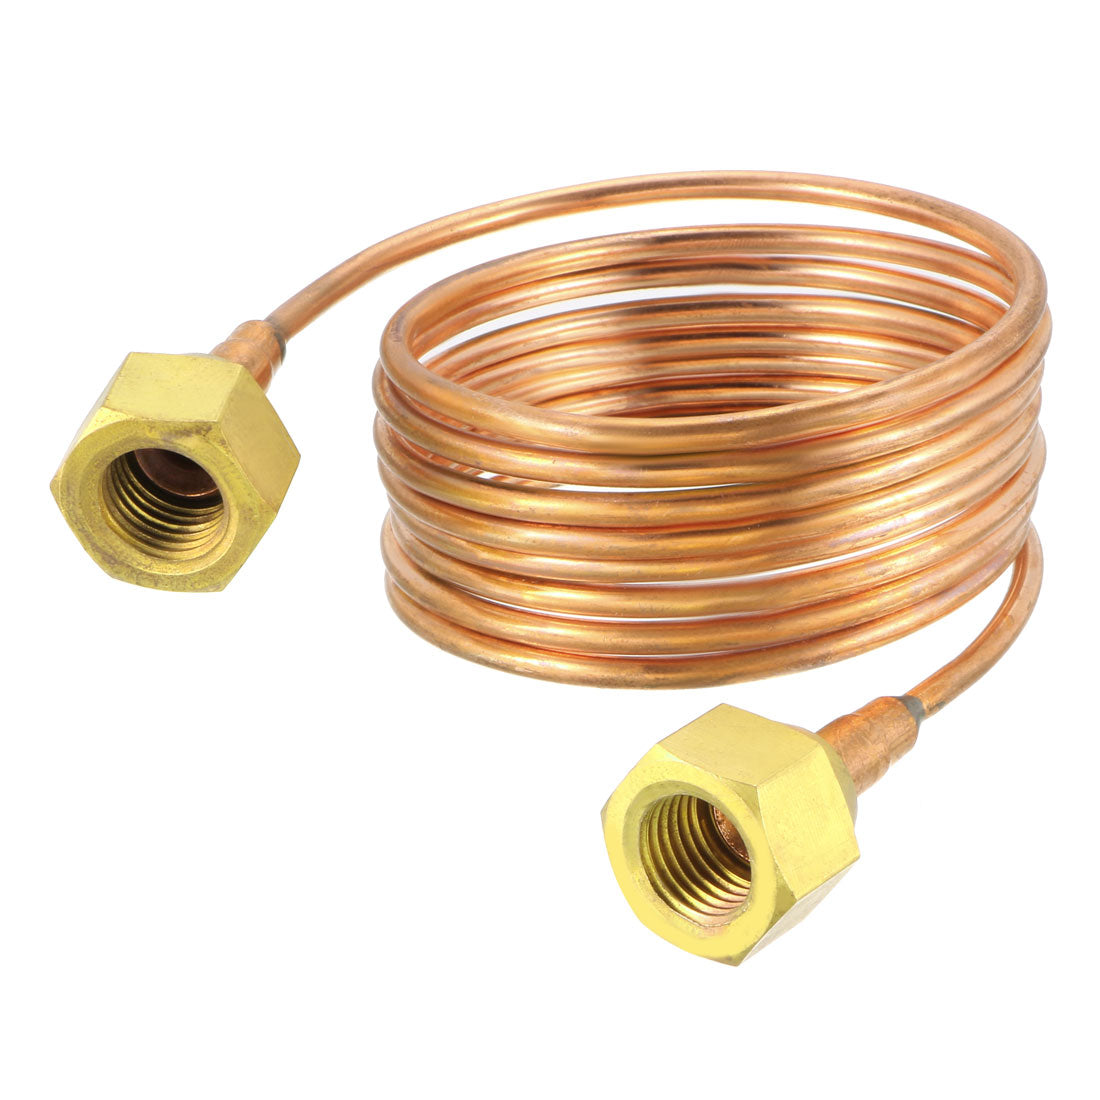 uxcell Uxcell Refrigeration Tubing 1/8" OD 5/64" ID Copper Tubing Coil with Short Flared Nuts